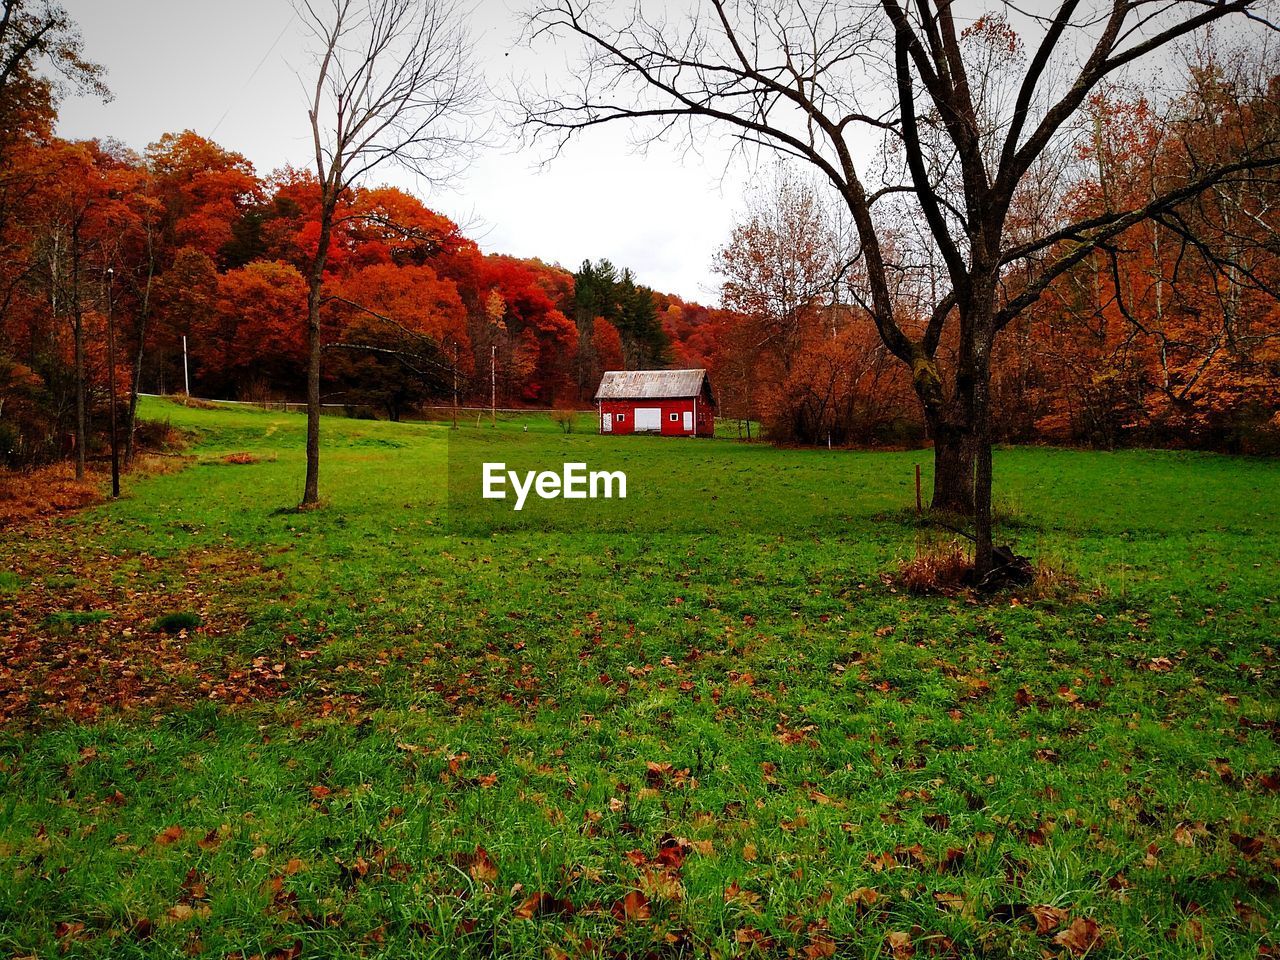 Barn on green field by trees during autumn